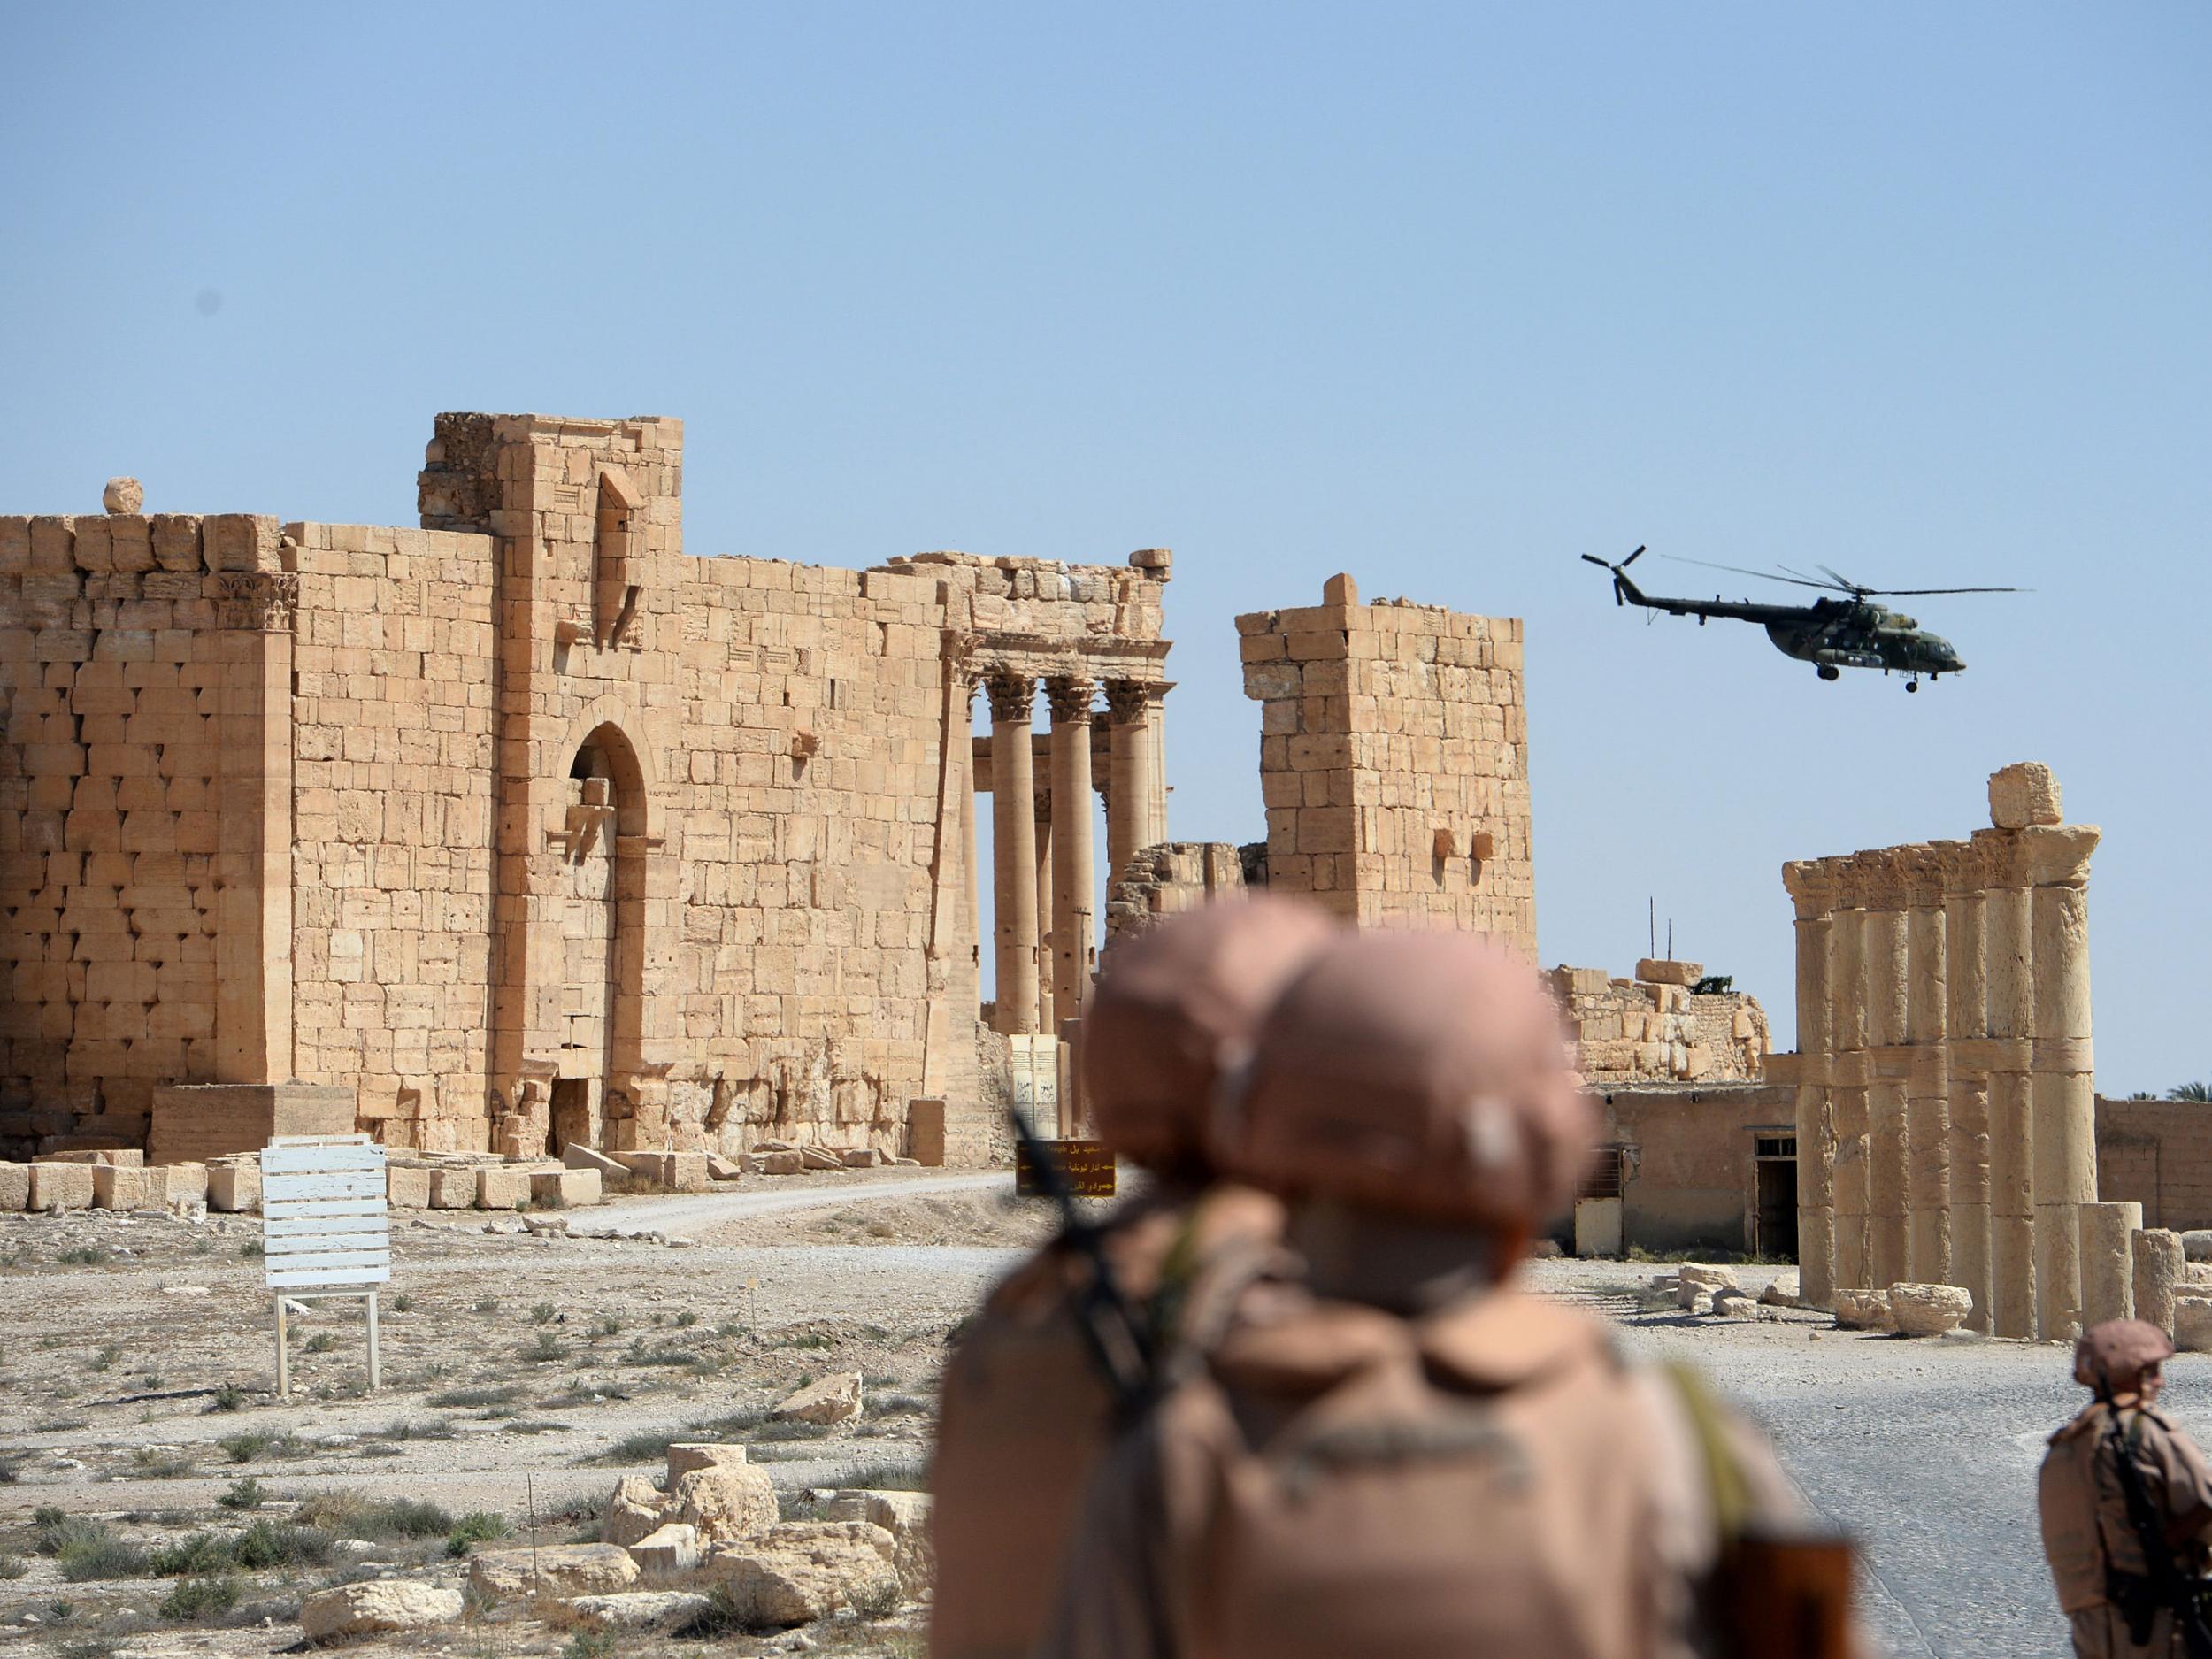 Russian forces patrol Palmyra after the recapture of the city from Isis (Getty)